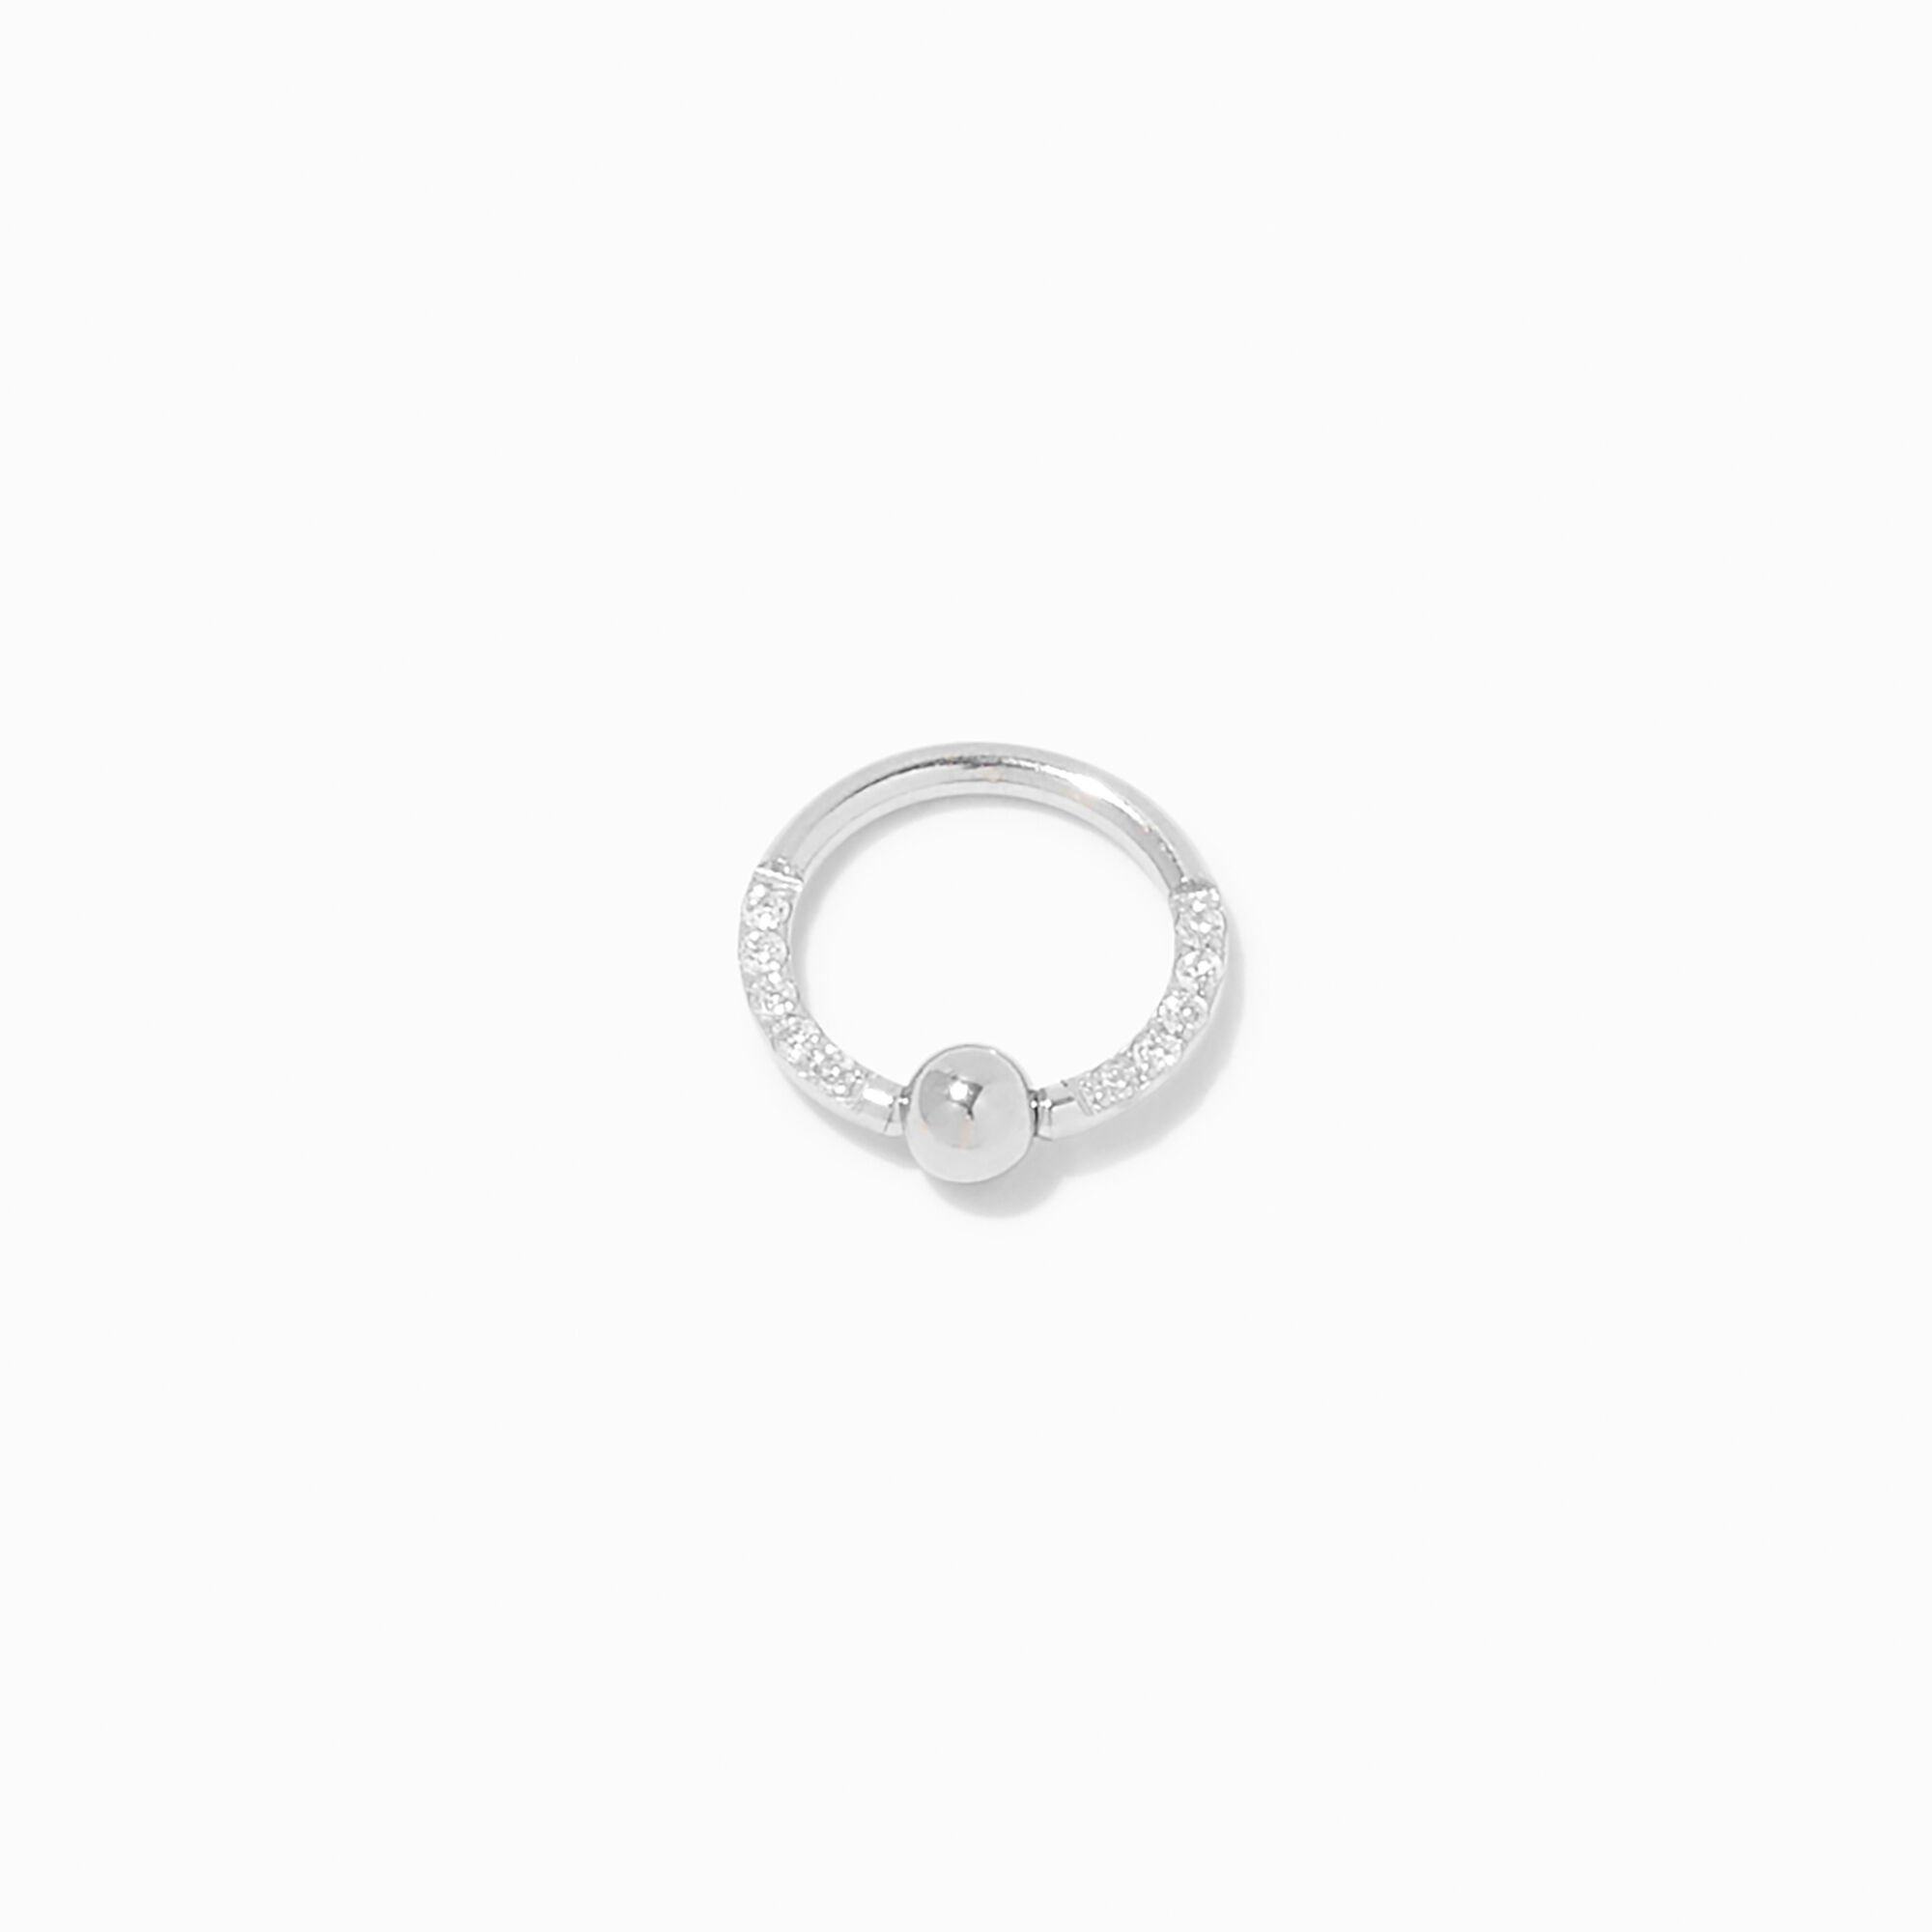 View Claires Tone Stainless Steel 16G Pavé Crystal Cartilage Hoop Earring Silver information